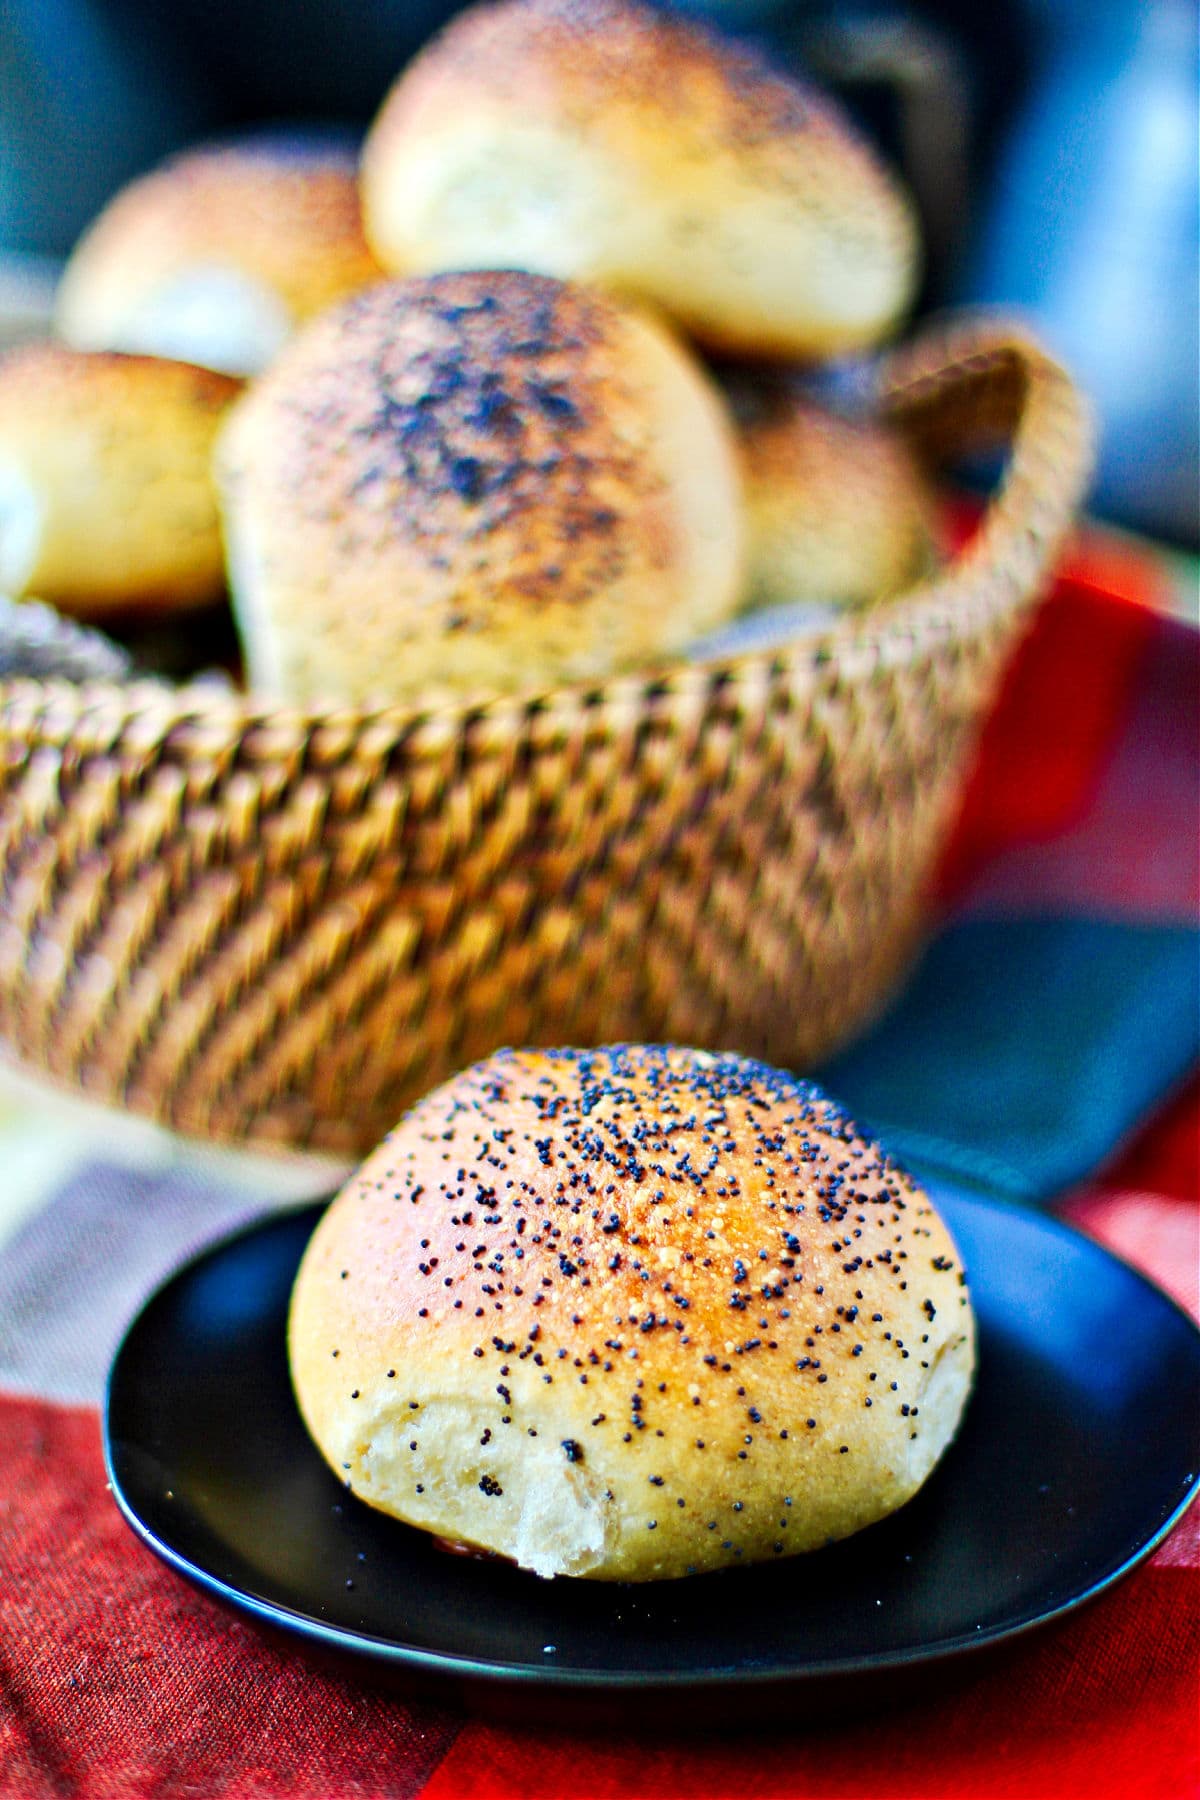 Dinner rolls in a basket with a plated roll in front.